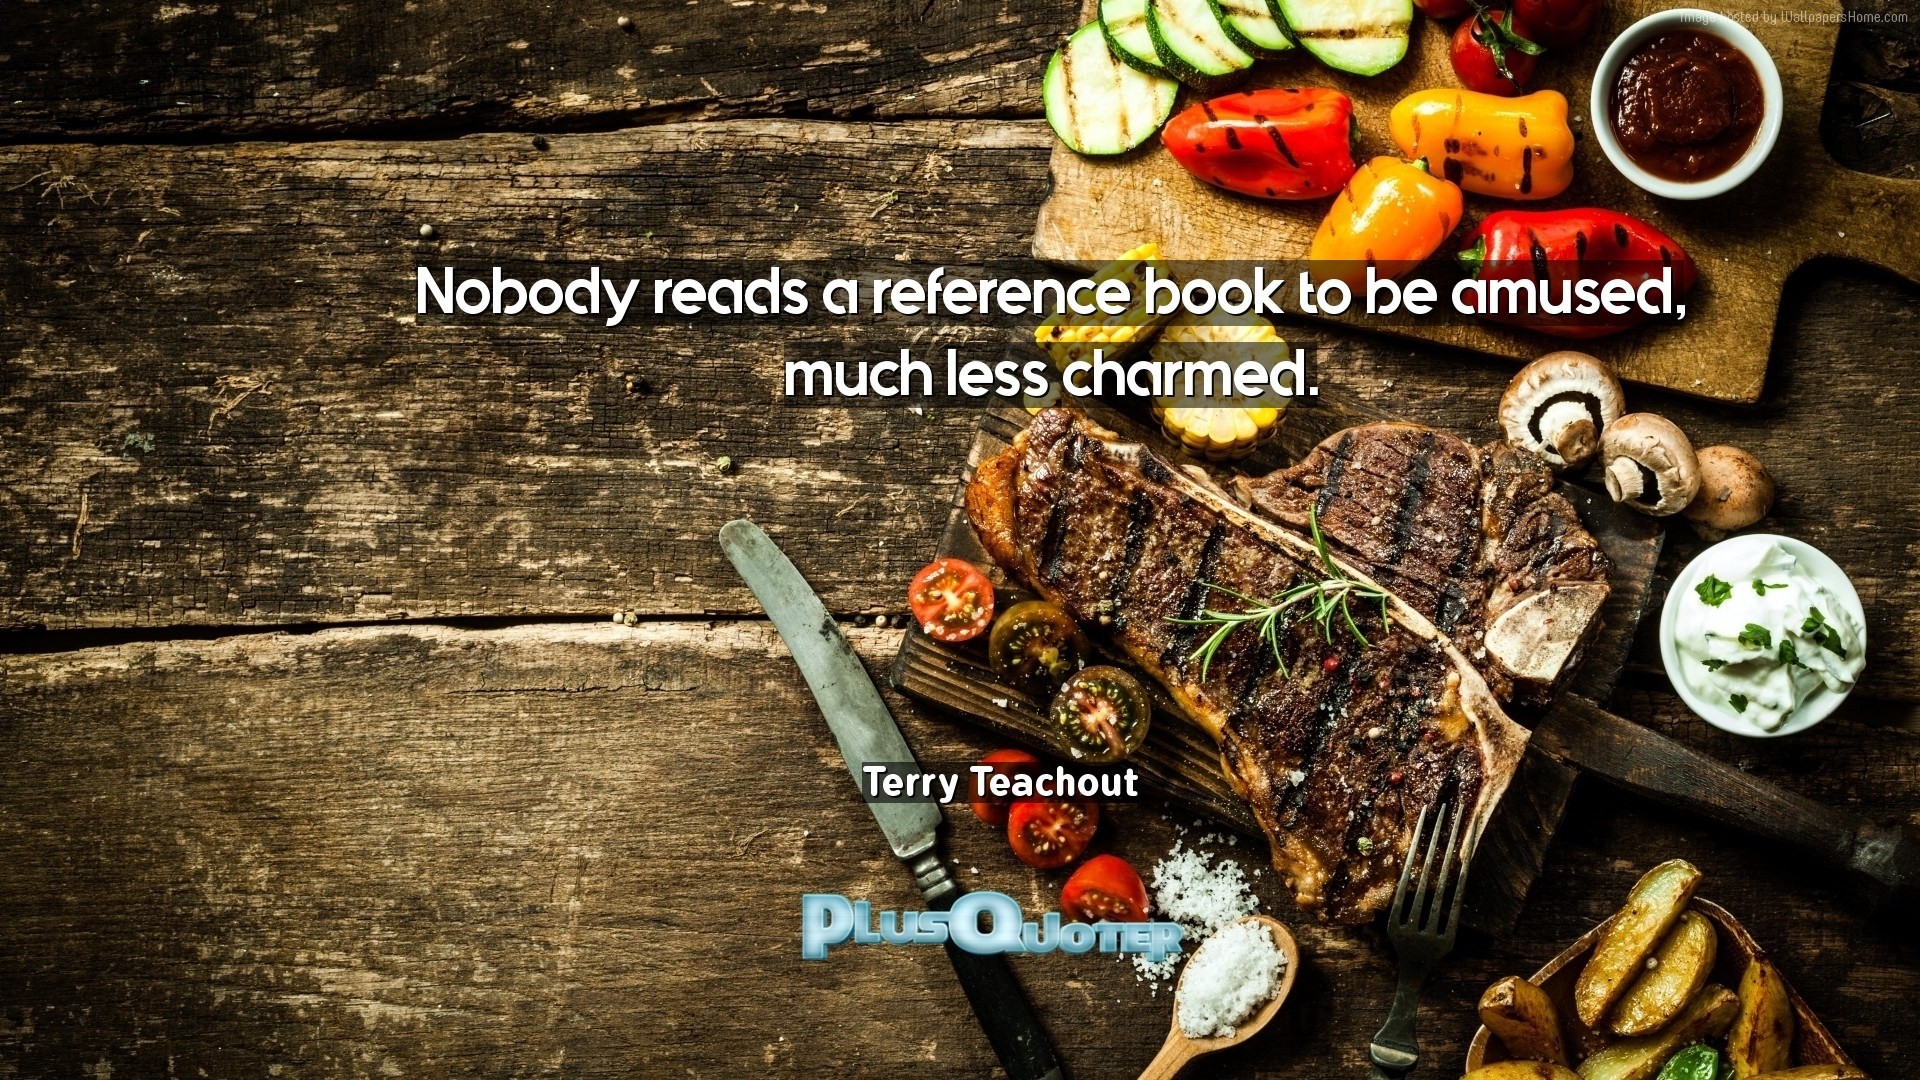 1920x1080 Download Wallpaper with inspirational Quotes- "Nobody reads a reference  book to be amused,